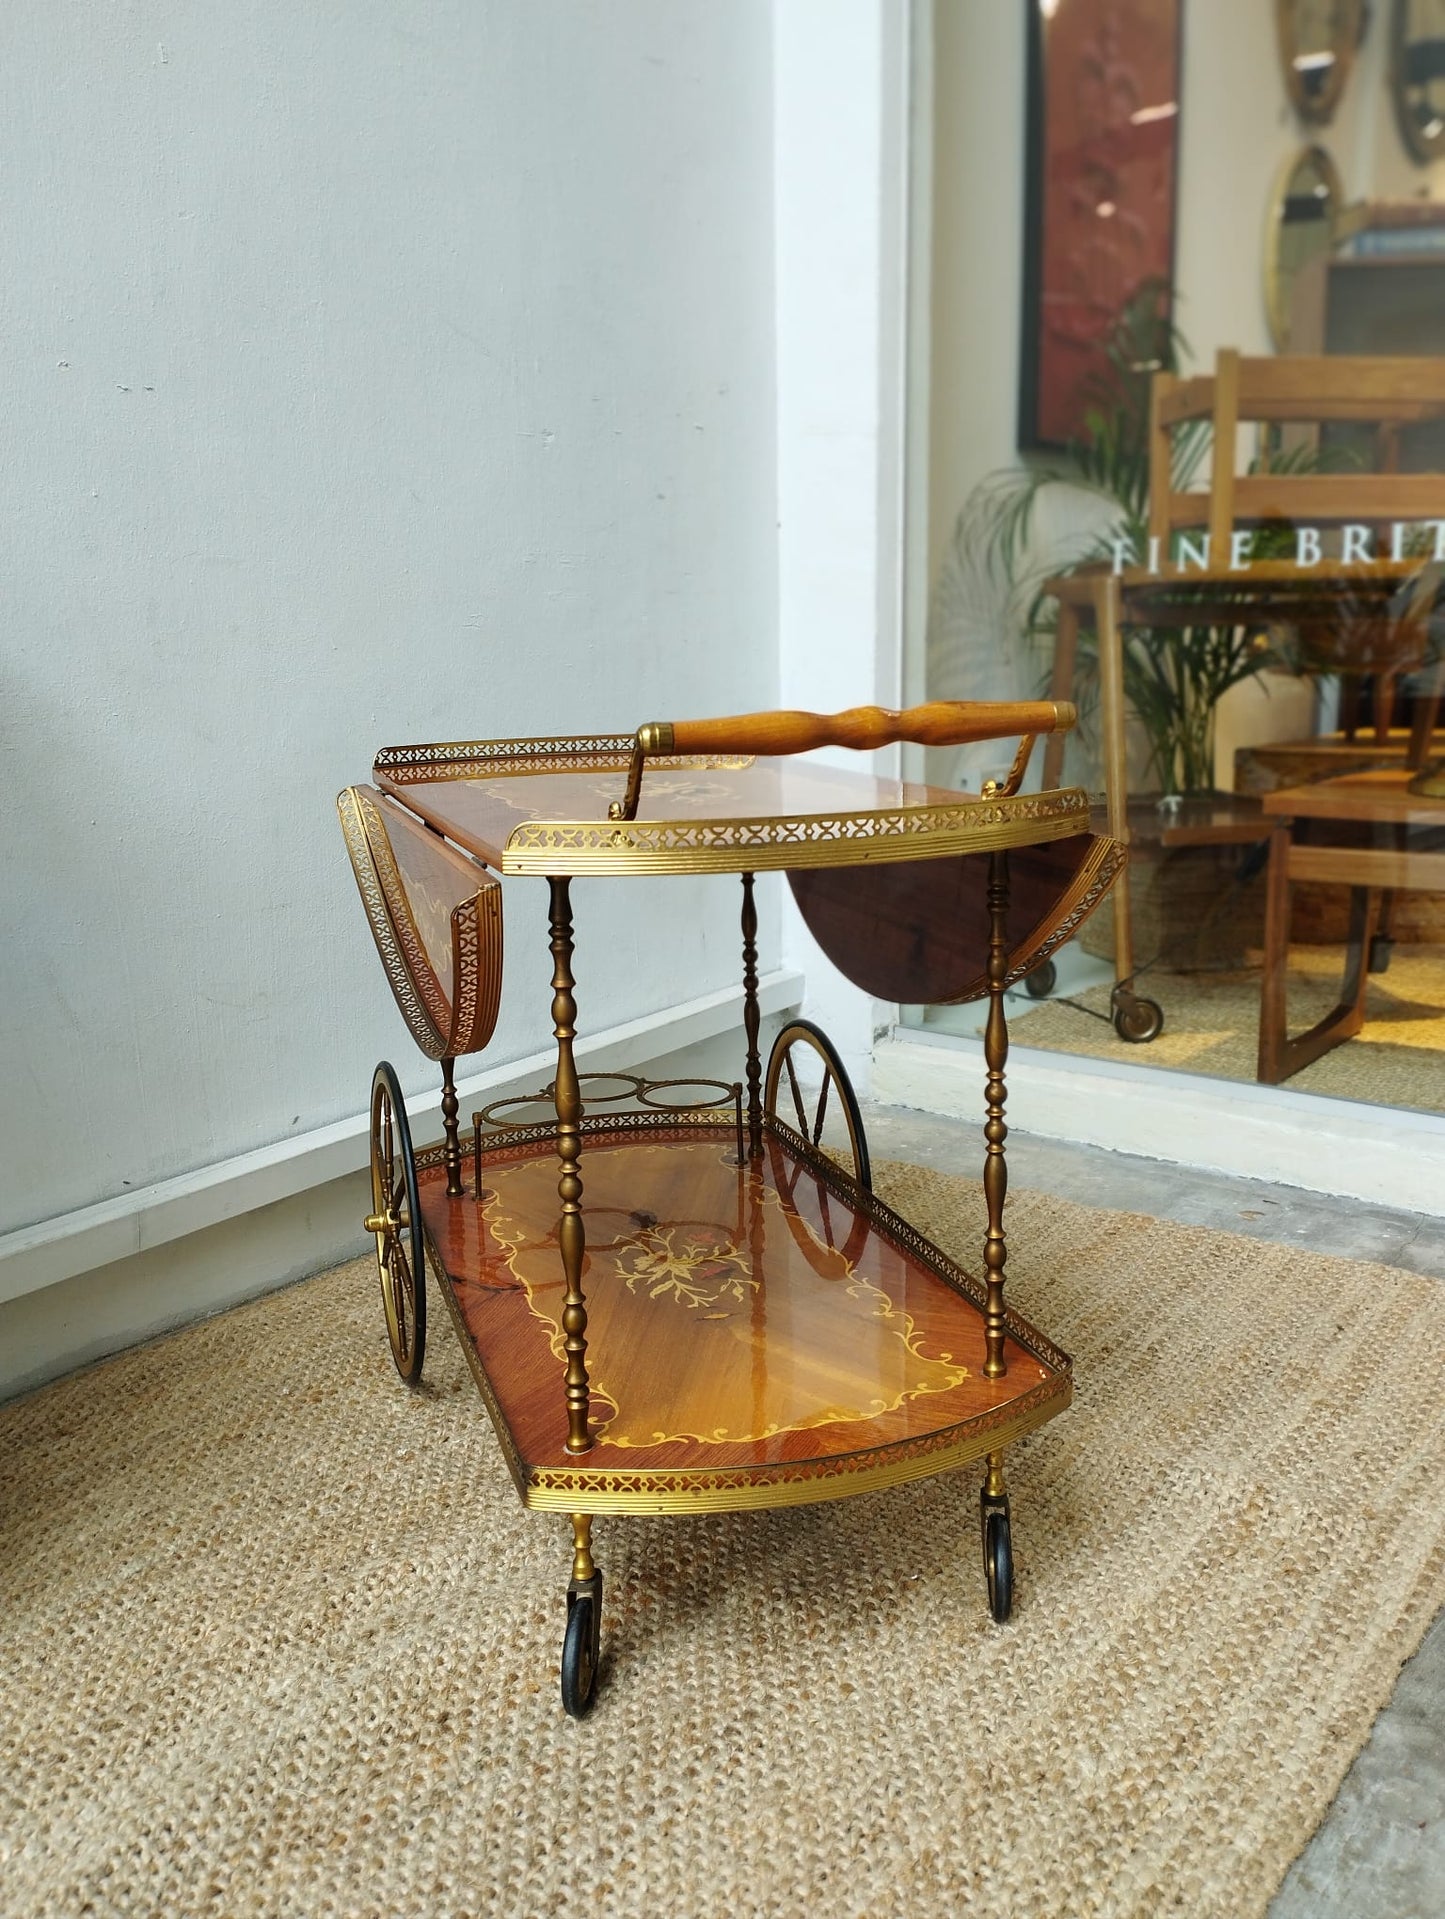 Vintage Trolley with folded side